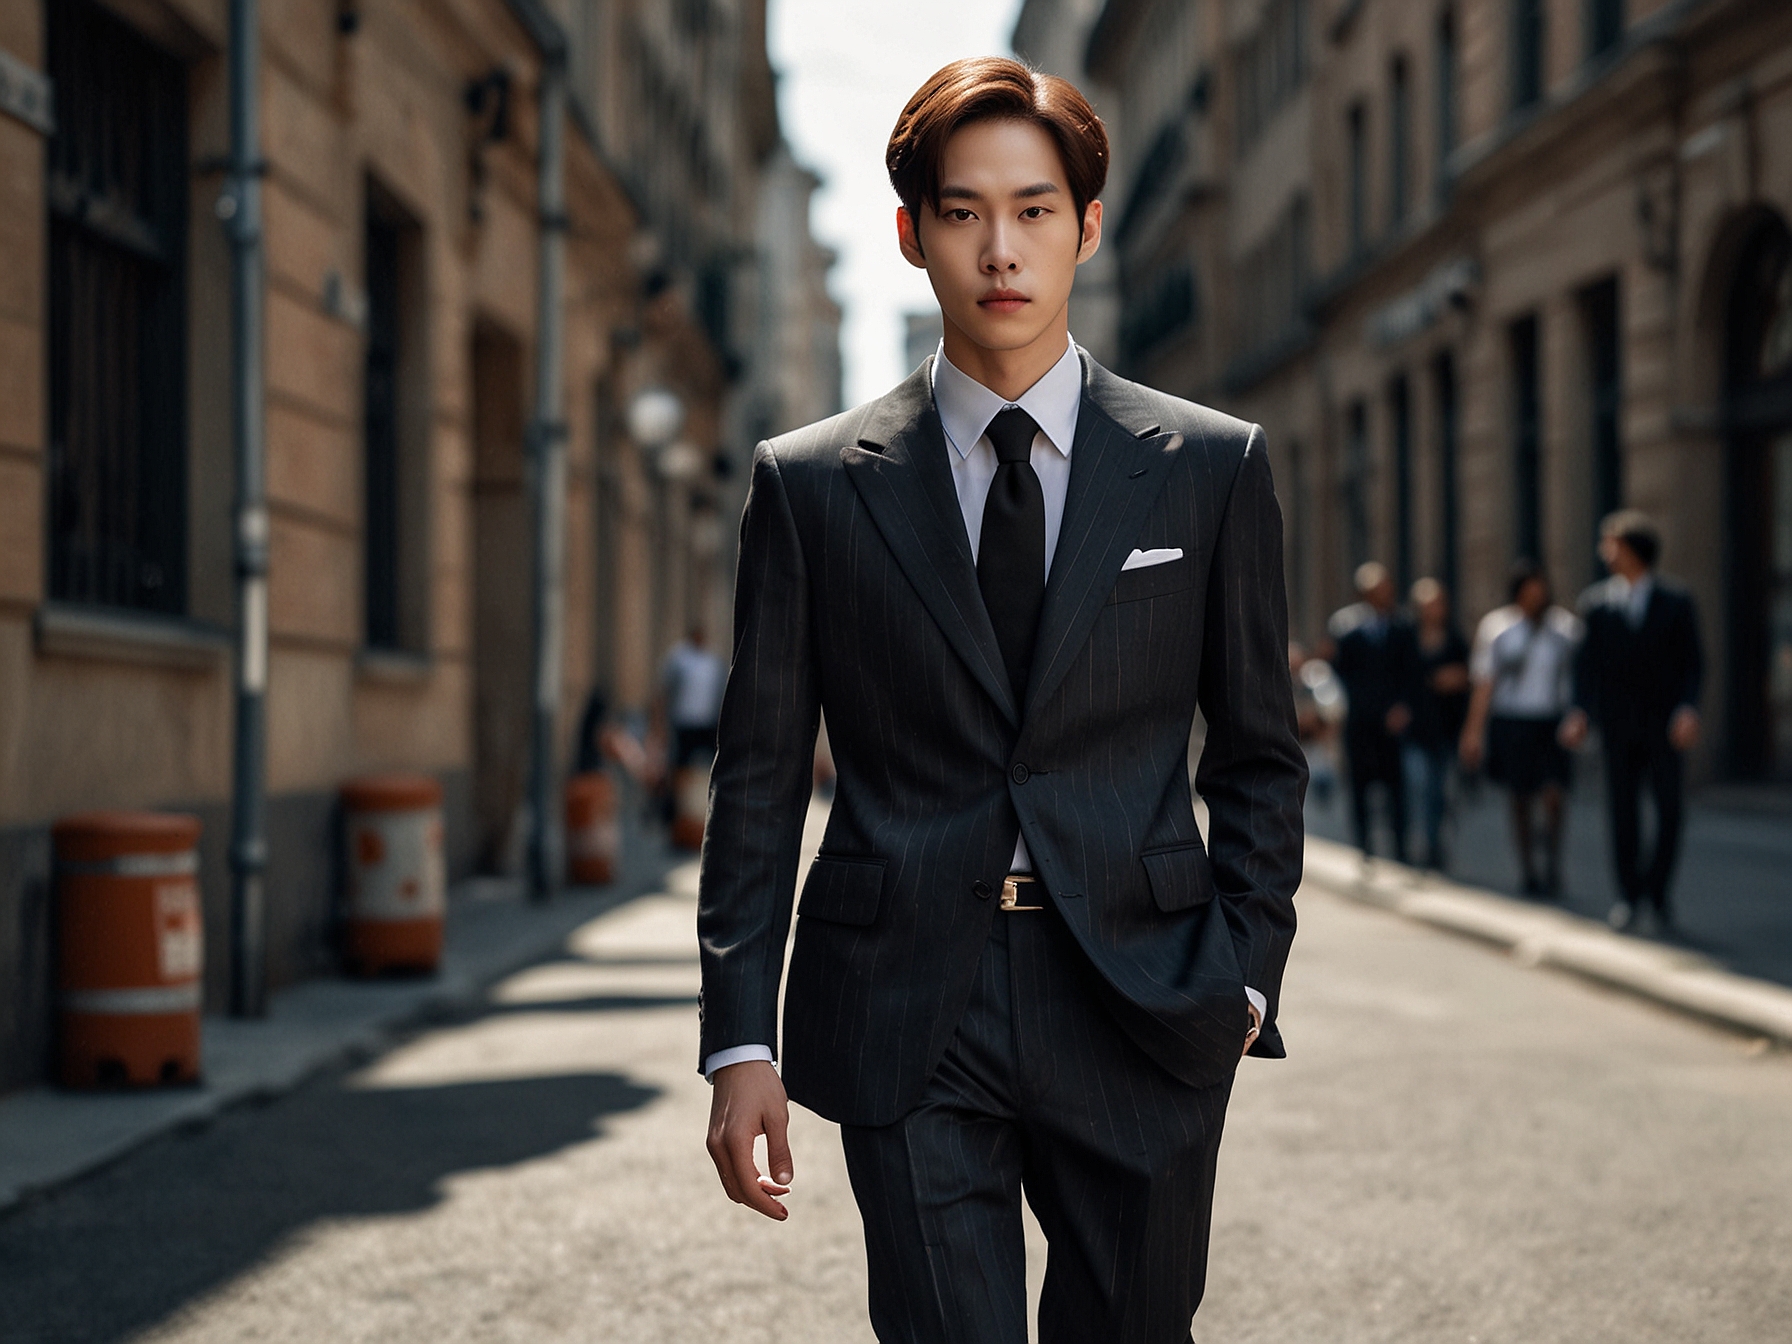 Doyoung from NCT's Dojaejung in a sharply tailored suit at Milan Fashion Week, exuding classic elegance and contemporary flair, capturing the attention of photographers and fashion enthusiasts.